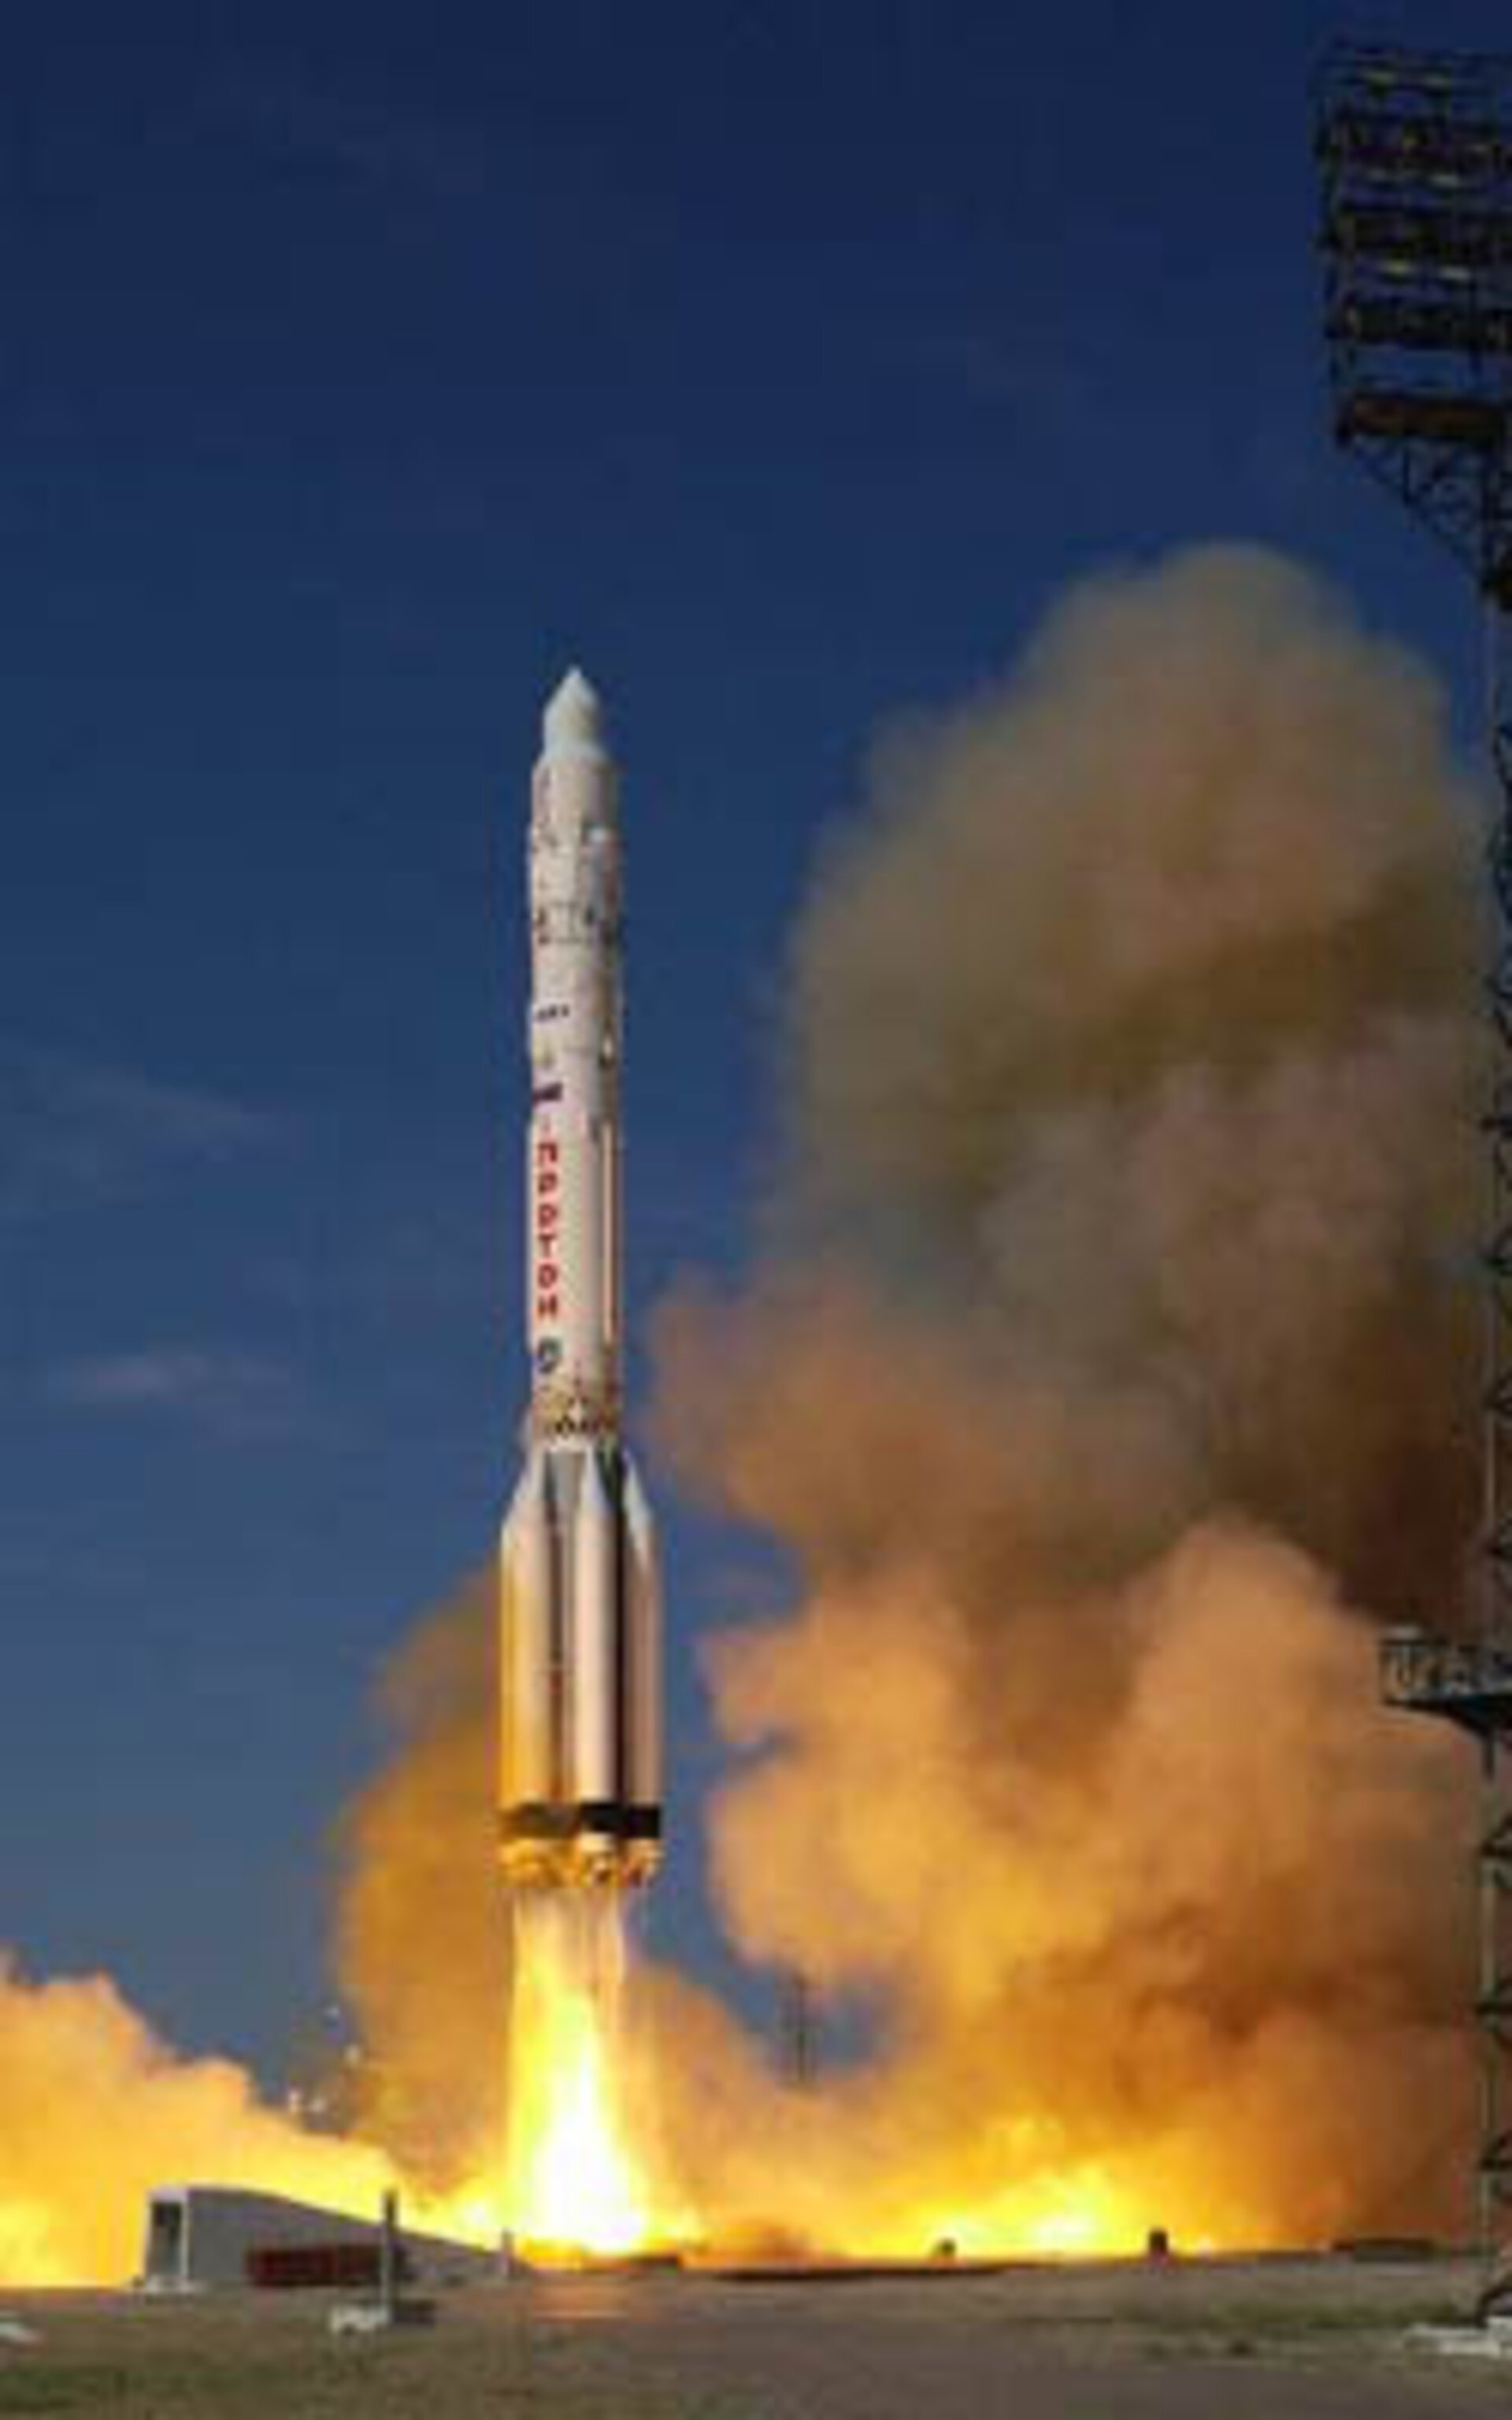 A Proton rocket launching from Baikonur